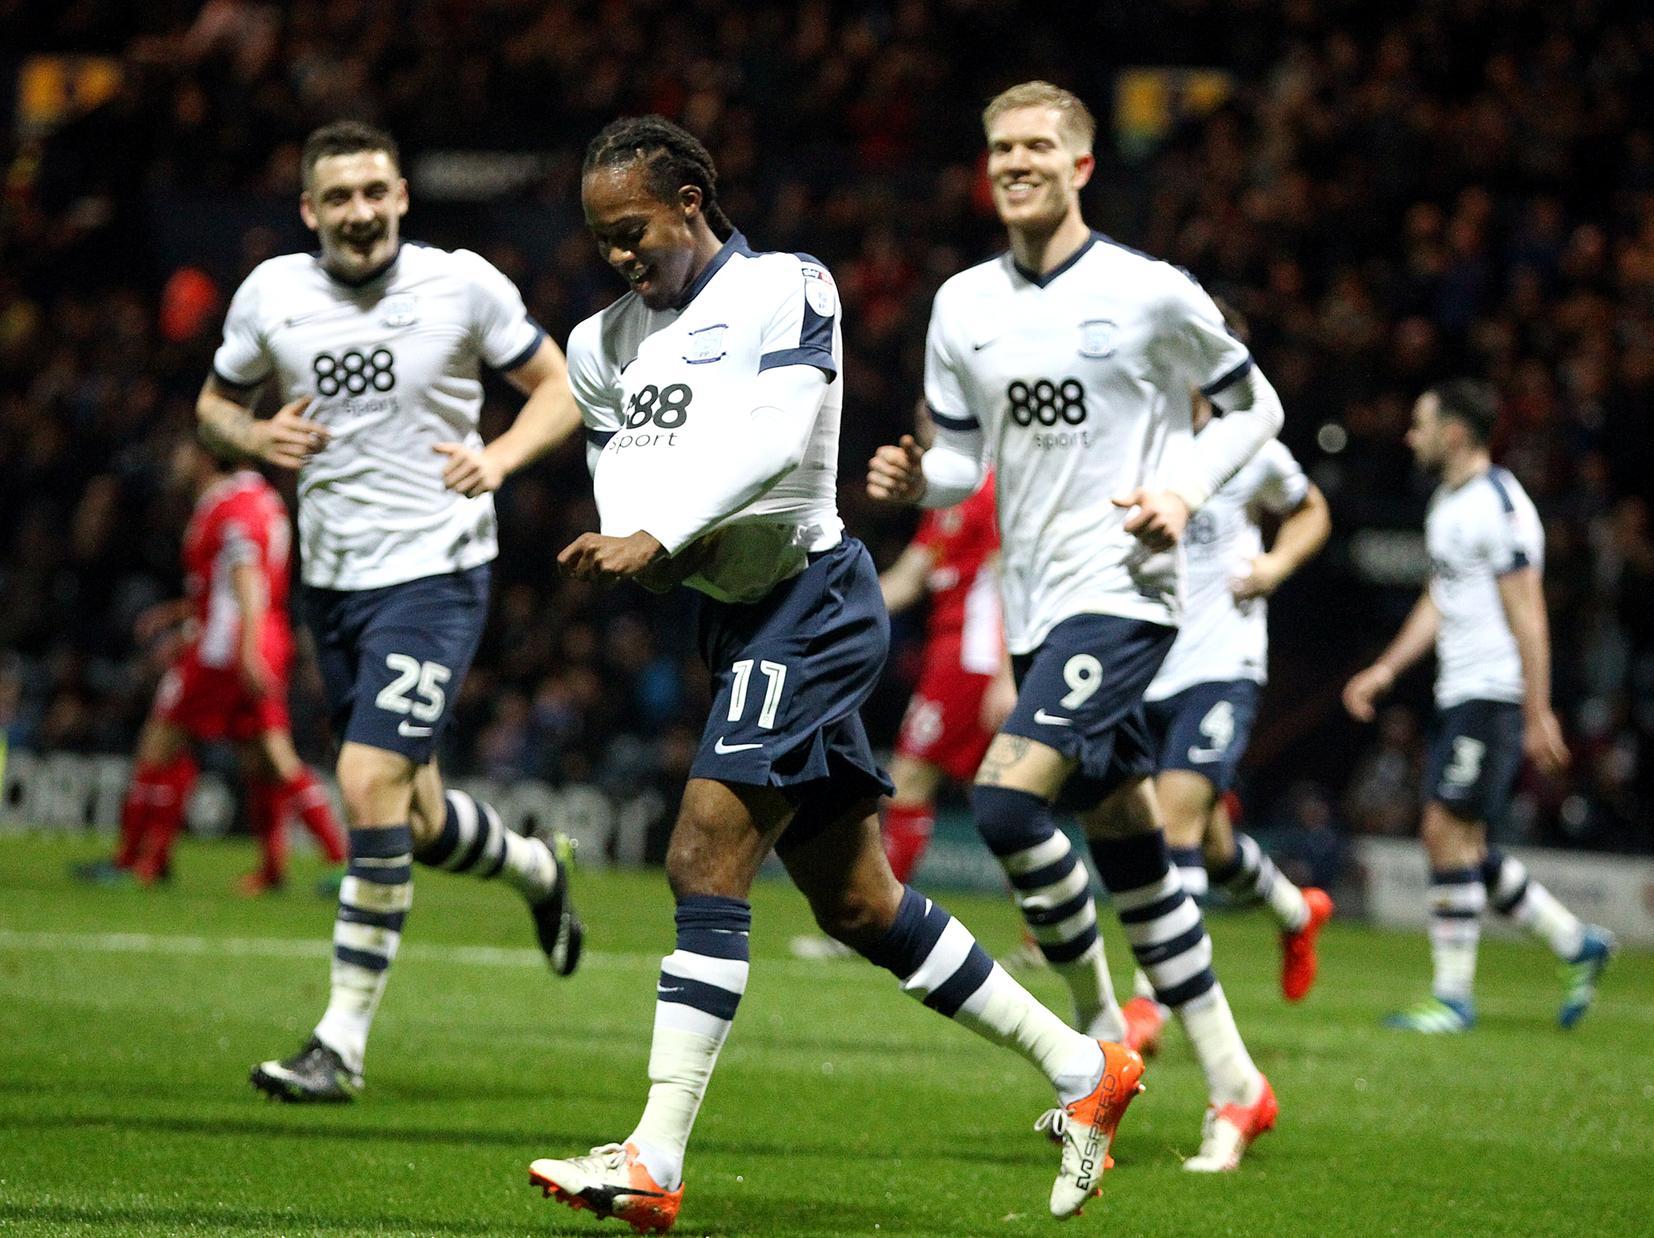 Daniel Johnson puts the ball under his shirt after scoring in the 3-2 win over Blackburn at Deepdale in November 2016 at Deepdale